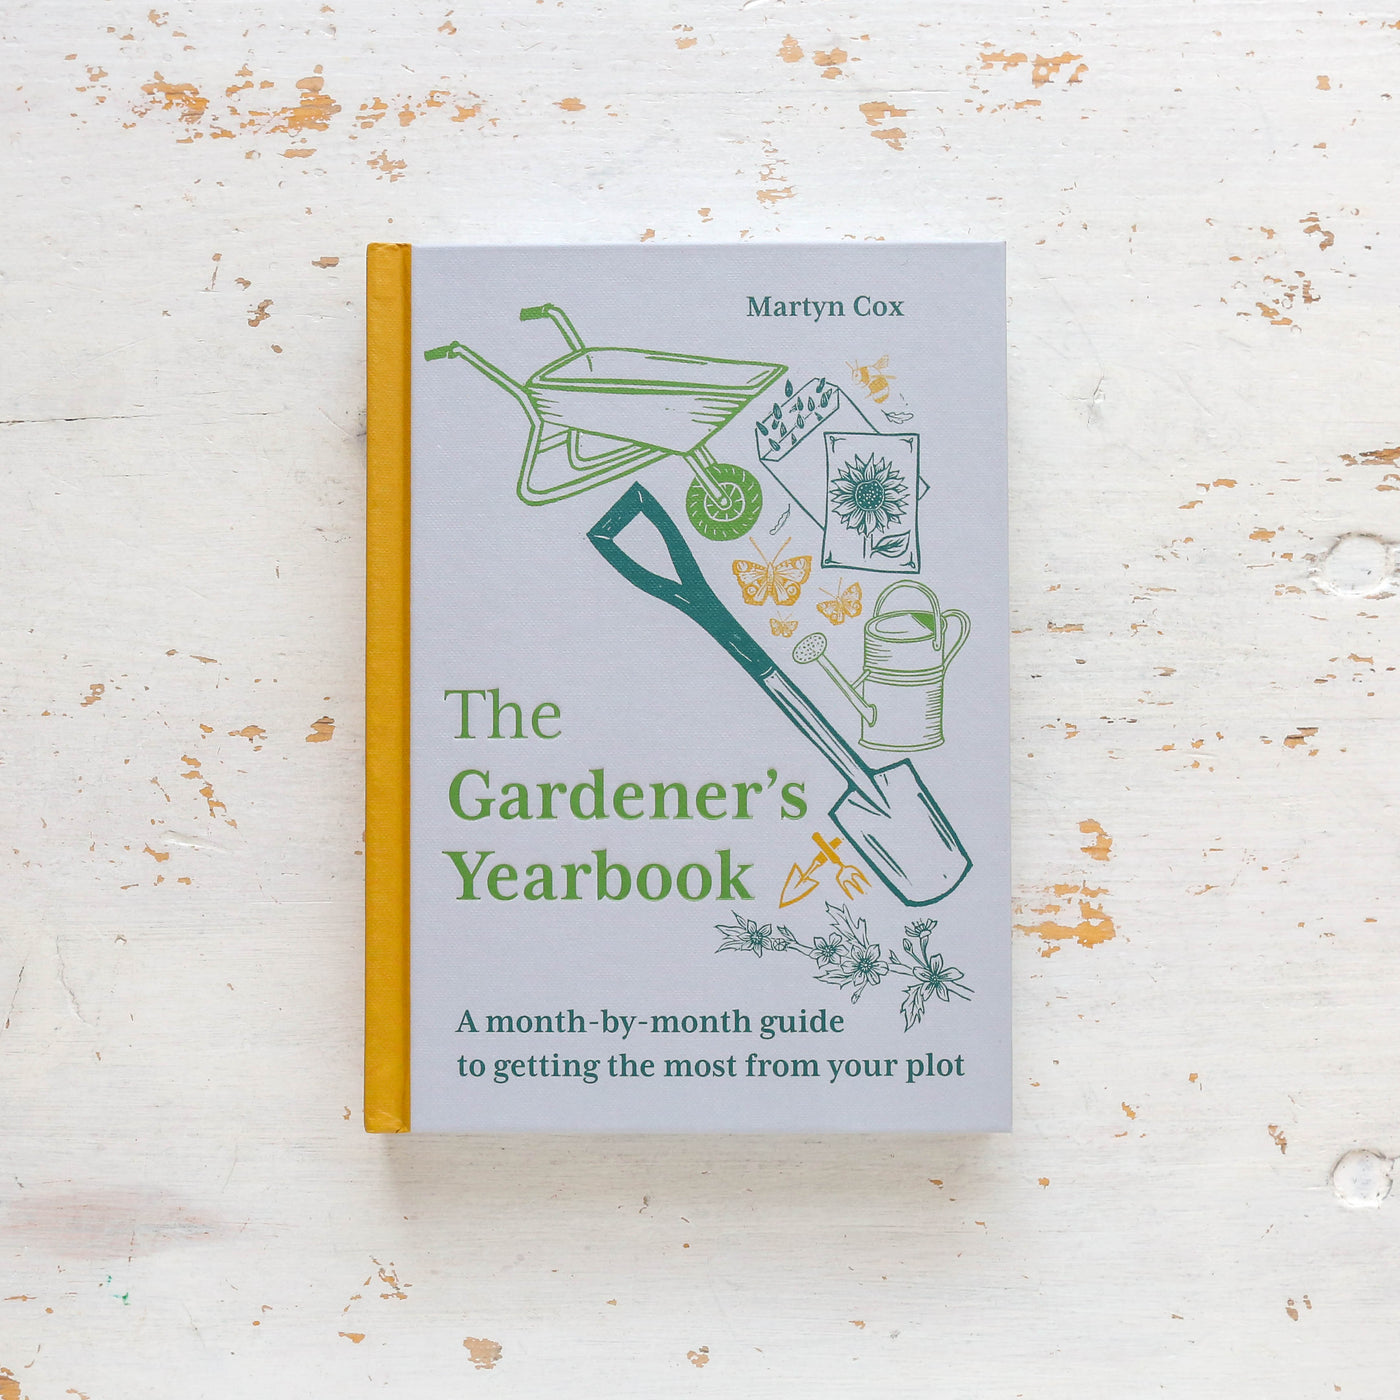 The Gardener's Yearbook : A month-by-month guide